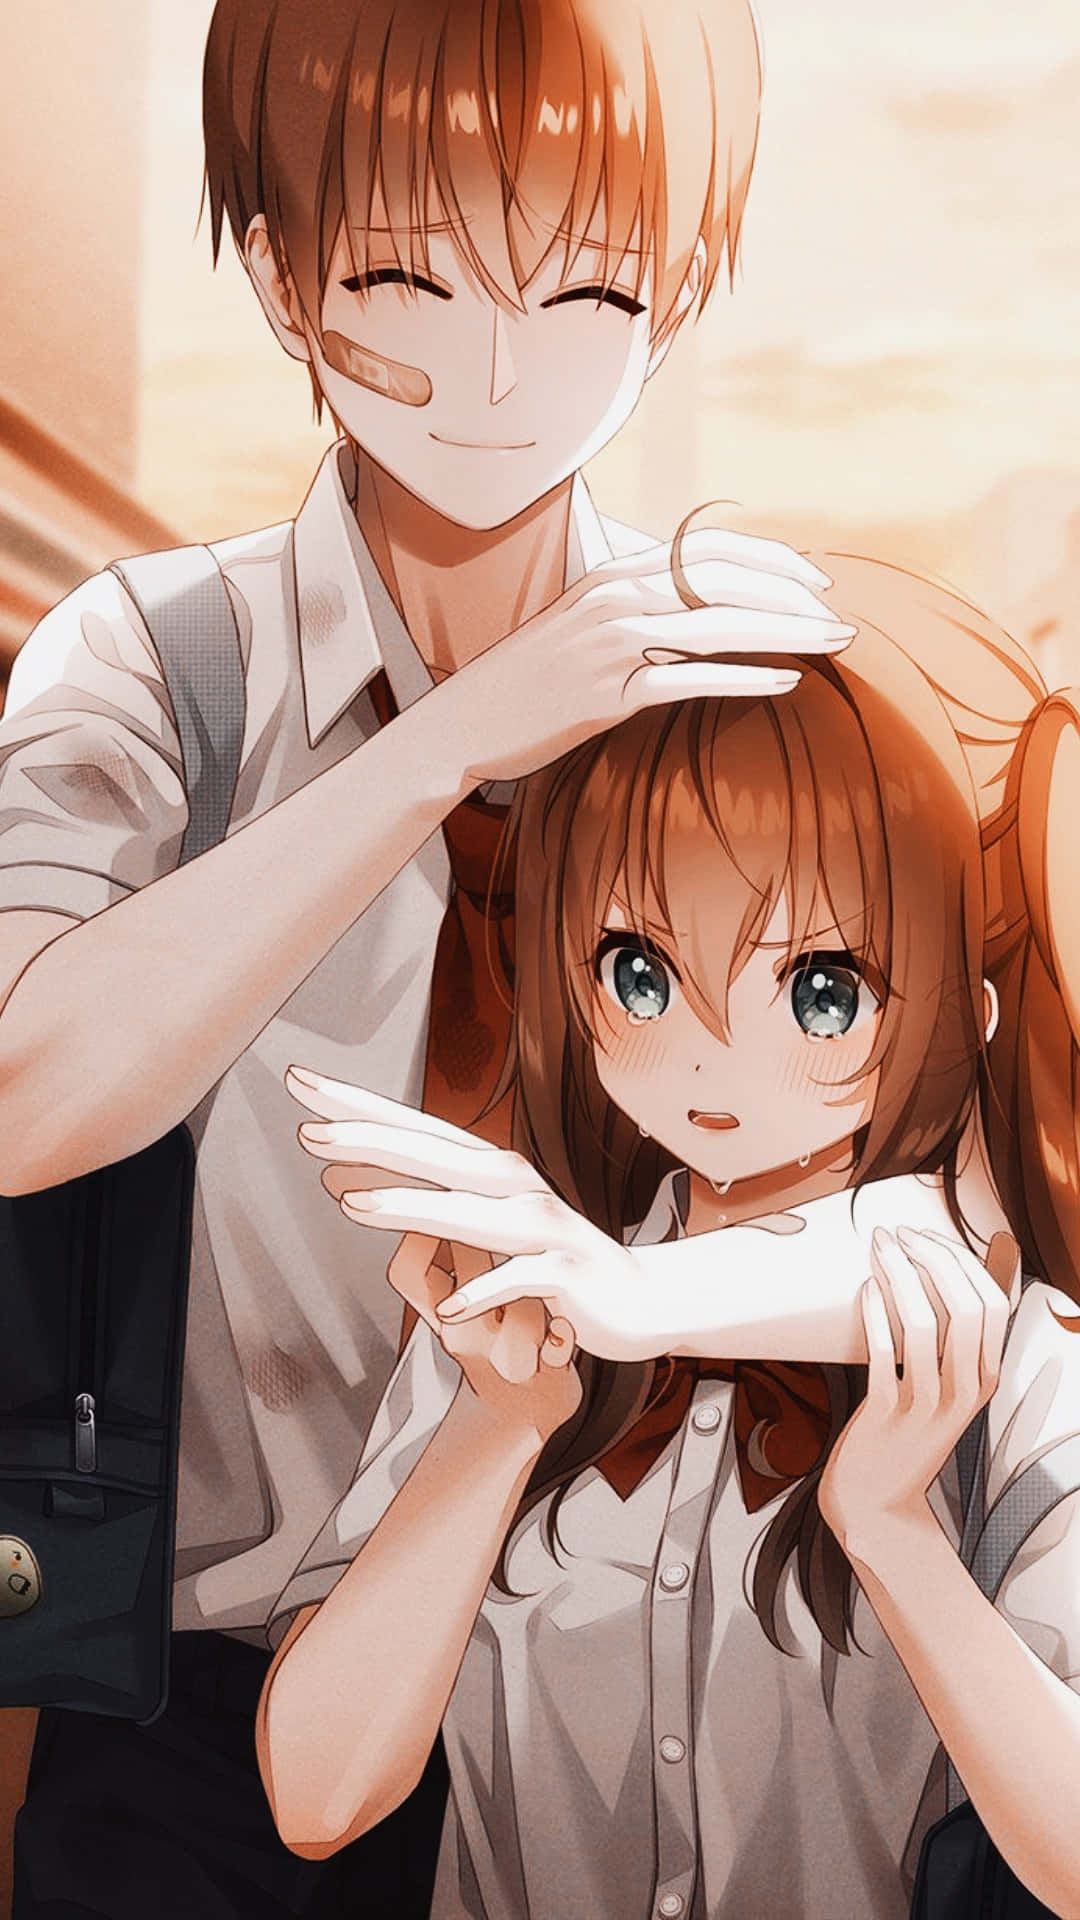 Sharing a Magical Moment: Aesthetic Couple Anime Wallpaper